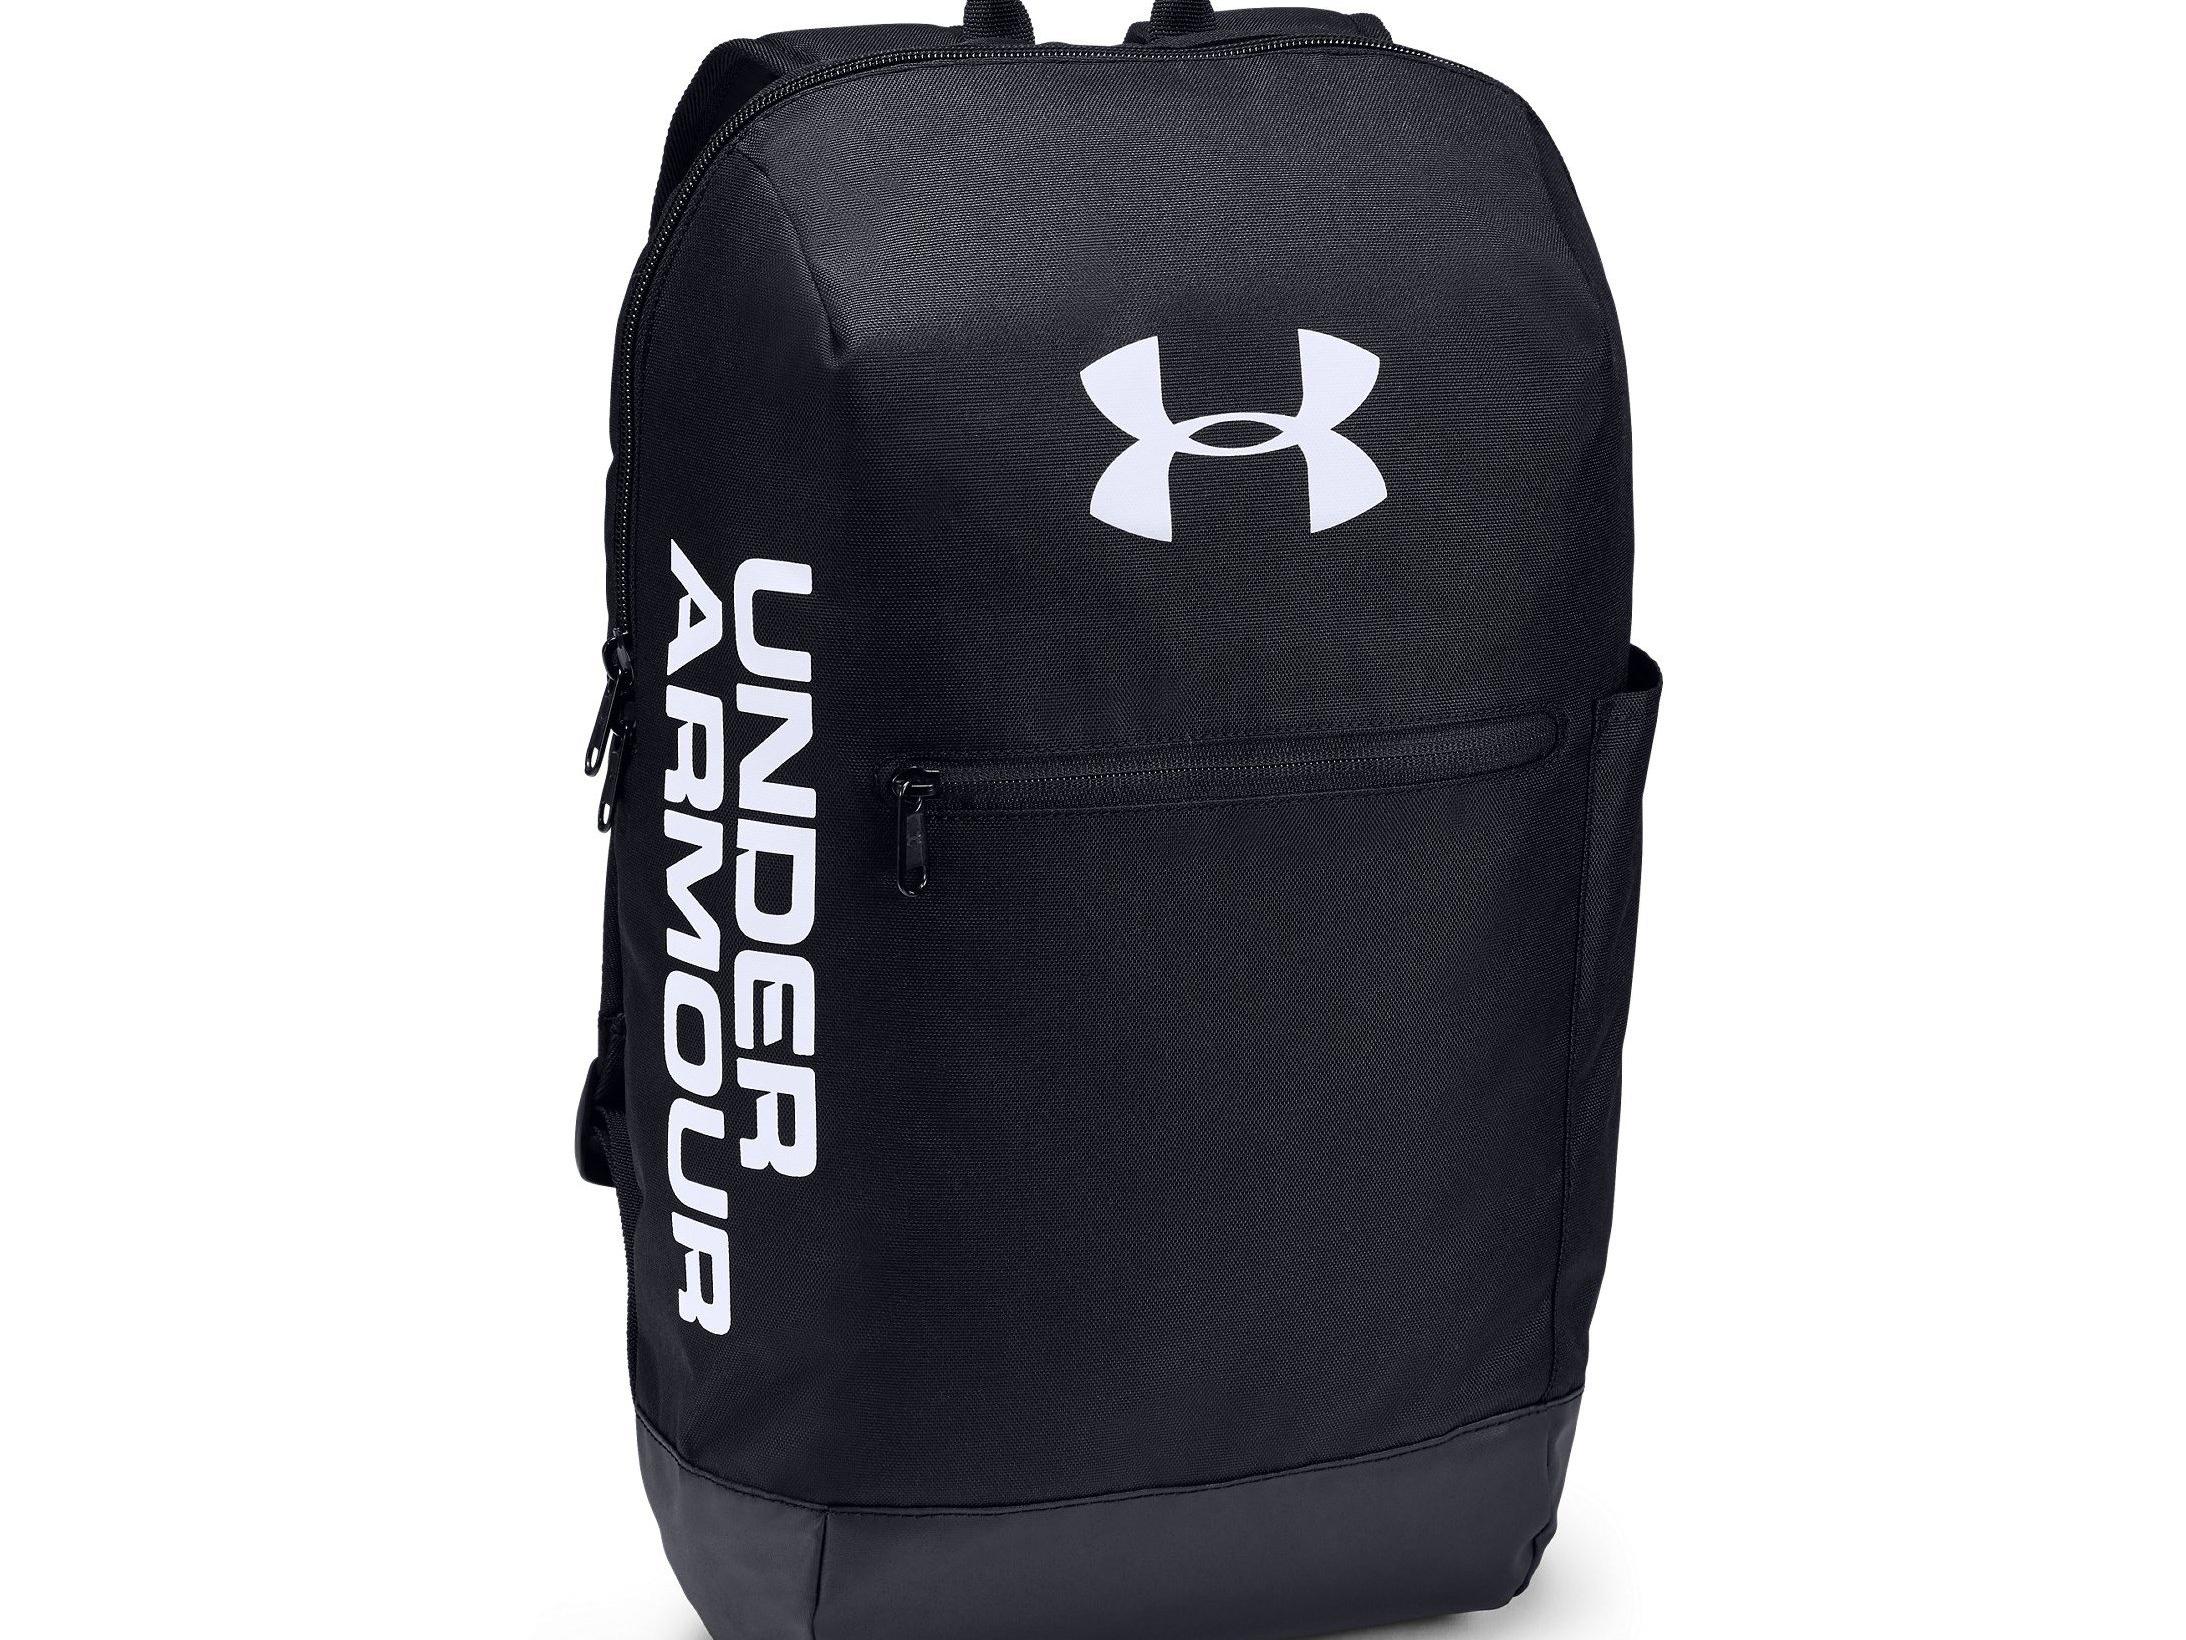 Under Armour | Patterson Backpack | Back Packs Sports Direct